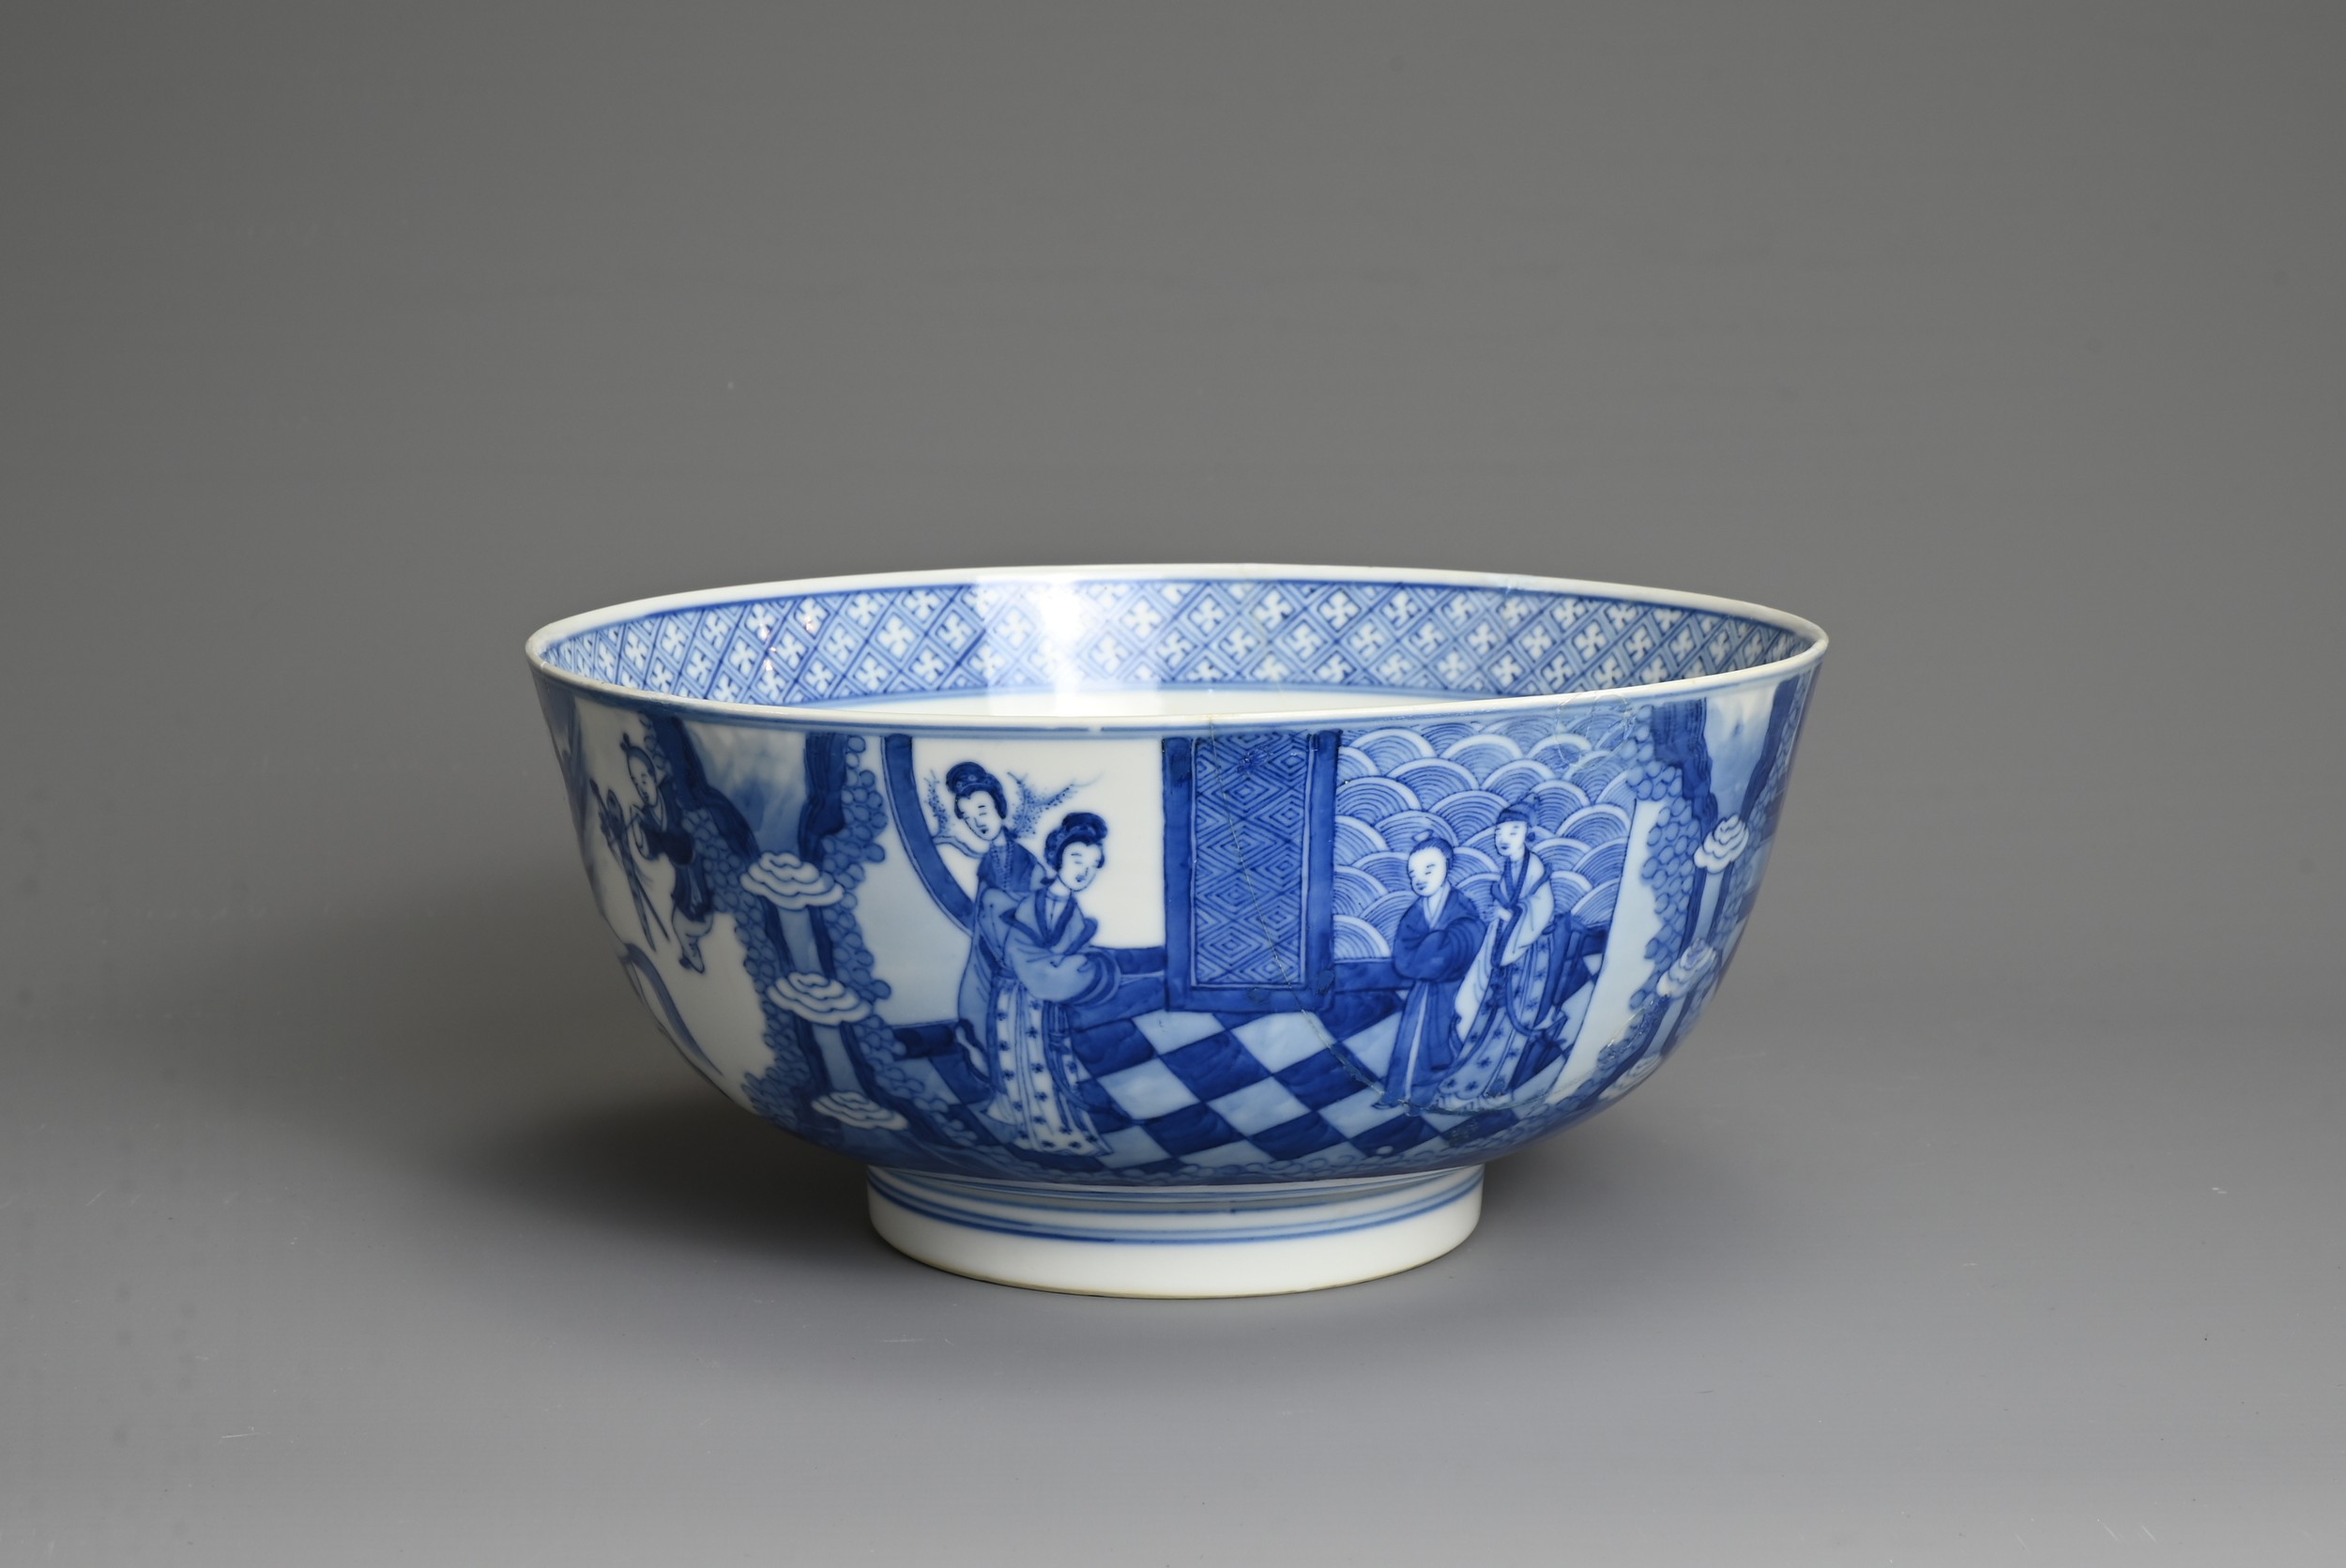 A CHINESE BLUE AND WHITE PORCELAIN BOWL, KANGXI PERIOD. Decorated with scene from the 'Romance of - Image 6 of 9